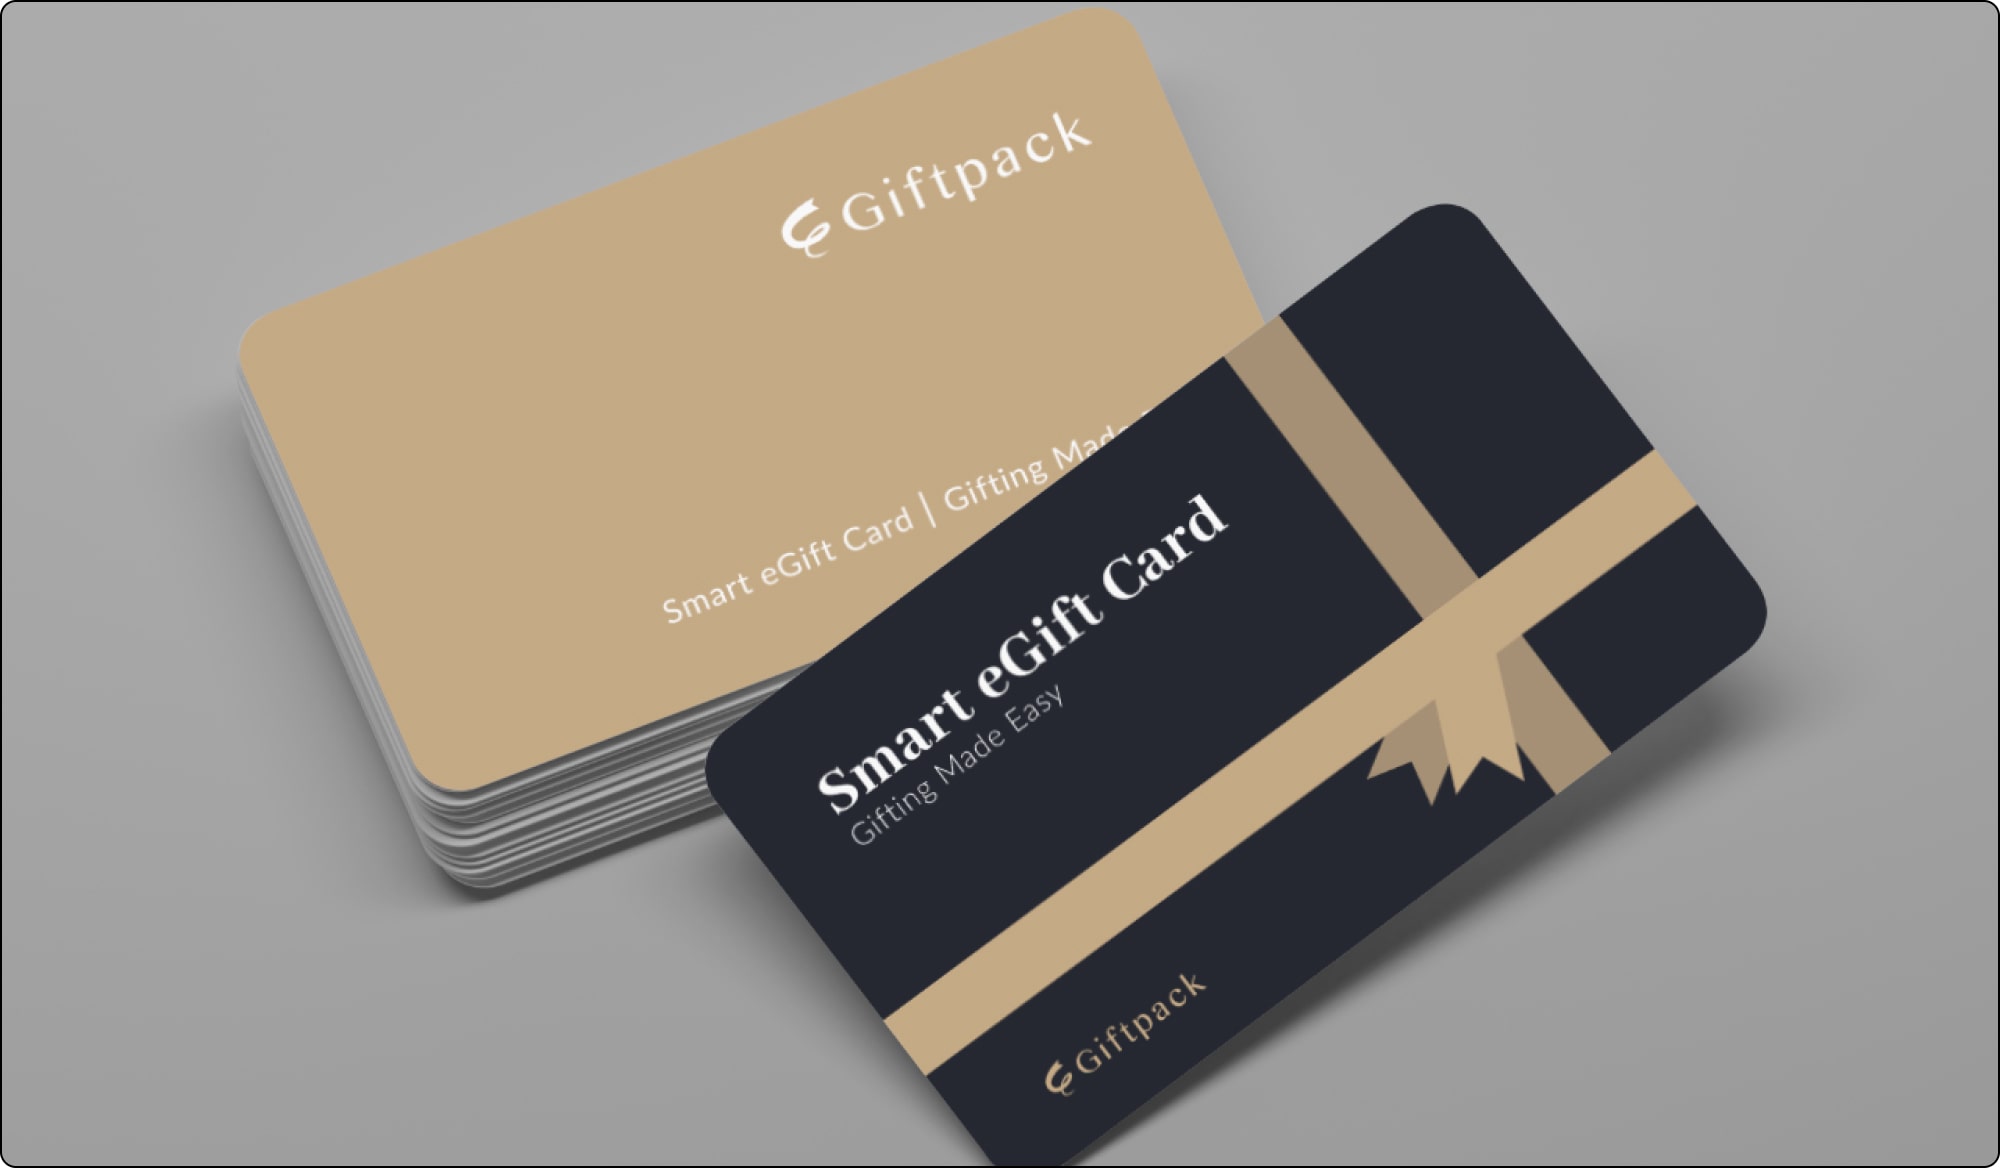 giftpack smart egift card for 350 brands for fun recognition gifts for employees